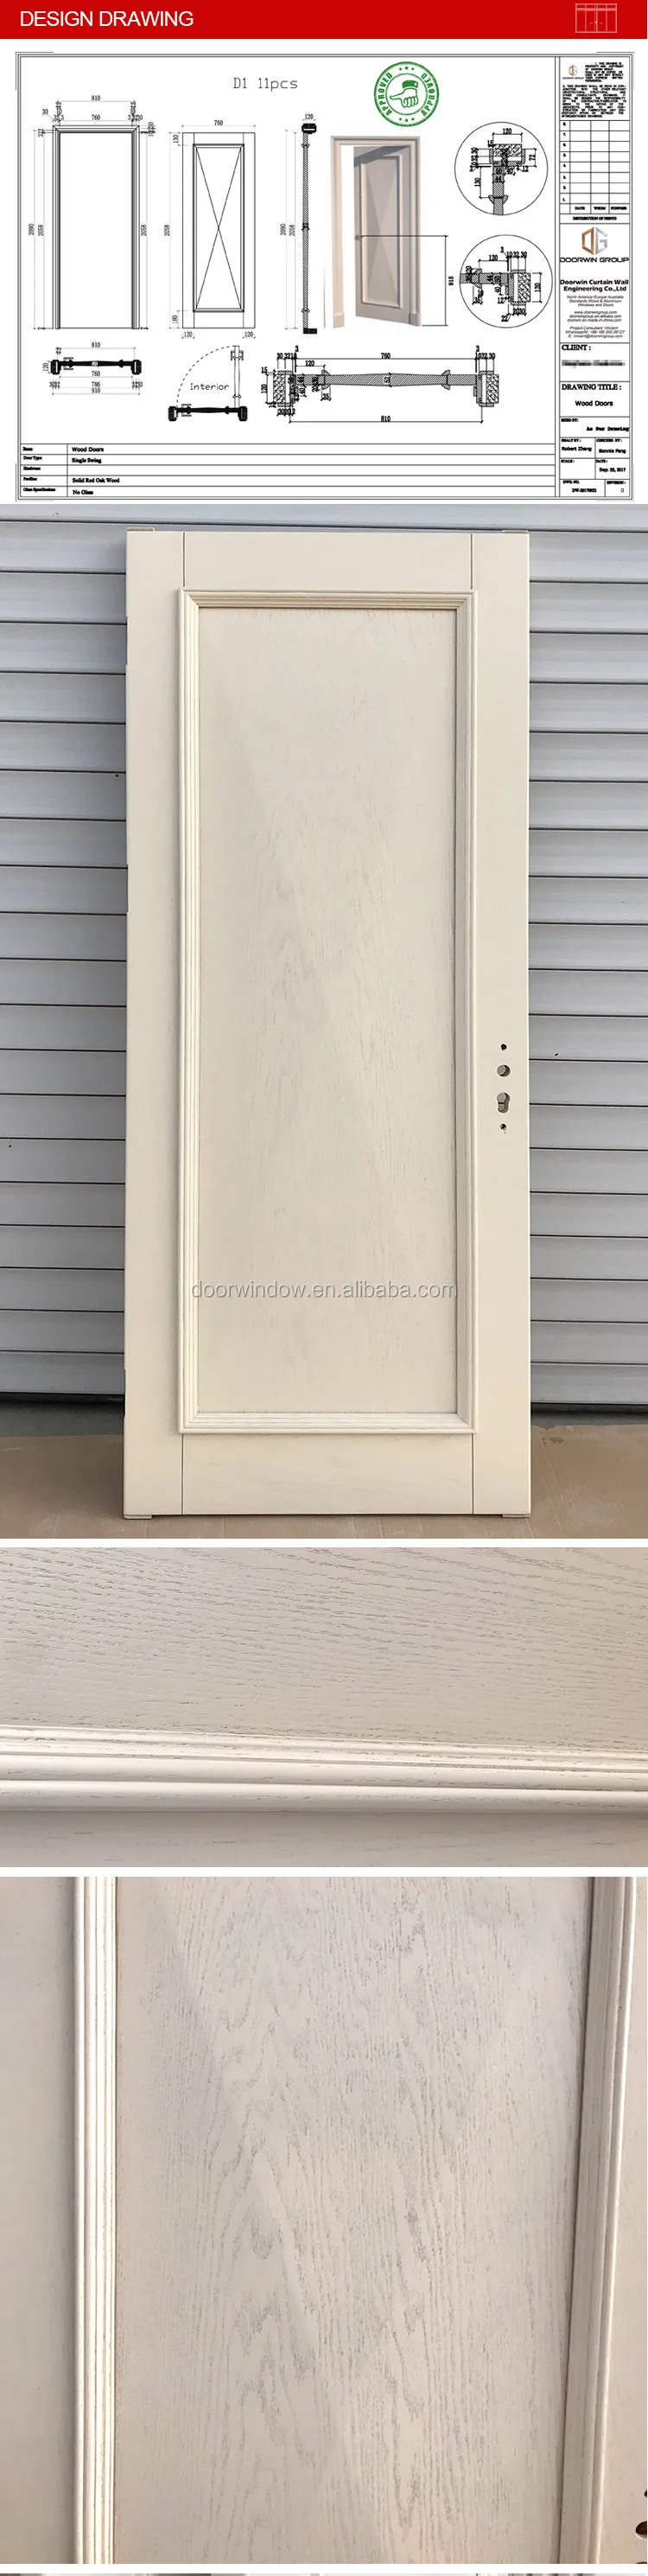 28 x 80 inch Smooth 4 Panel Hollow Core Primed Composite Single Dressing Room Doors